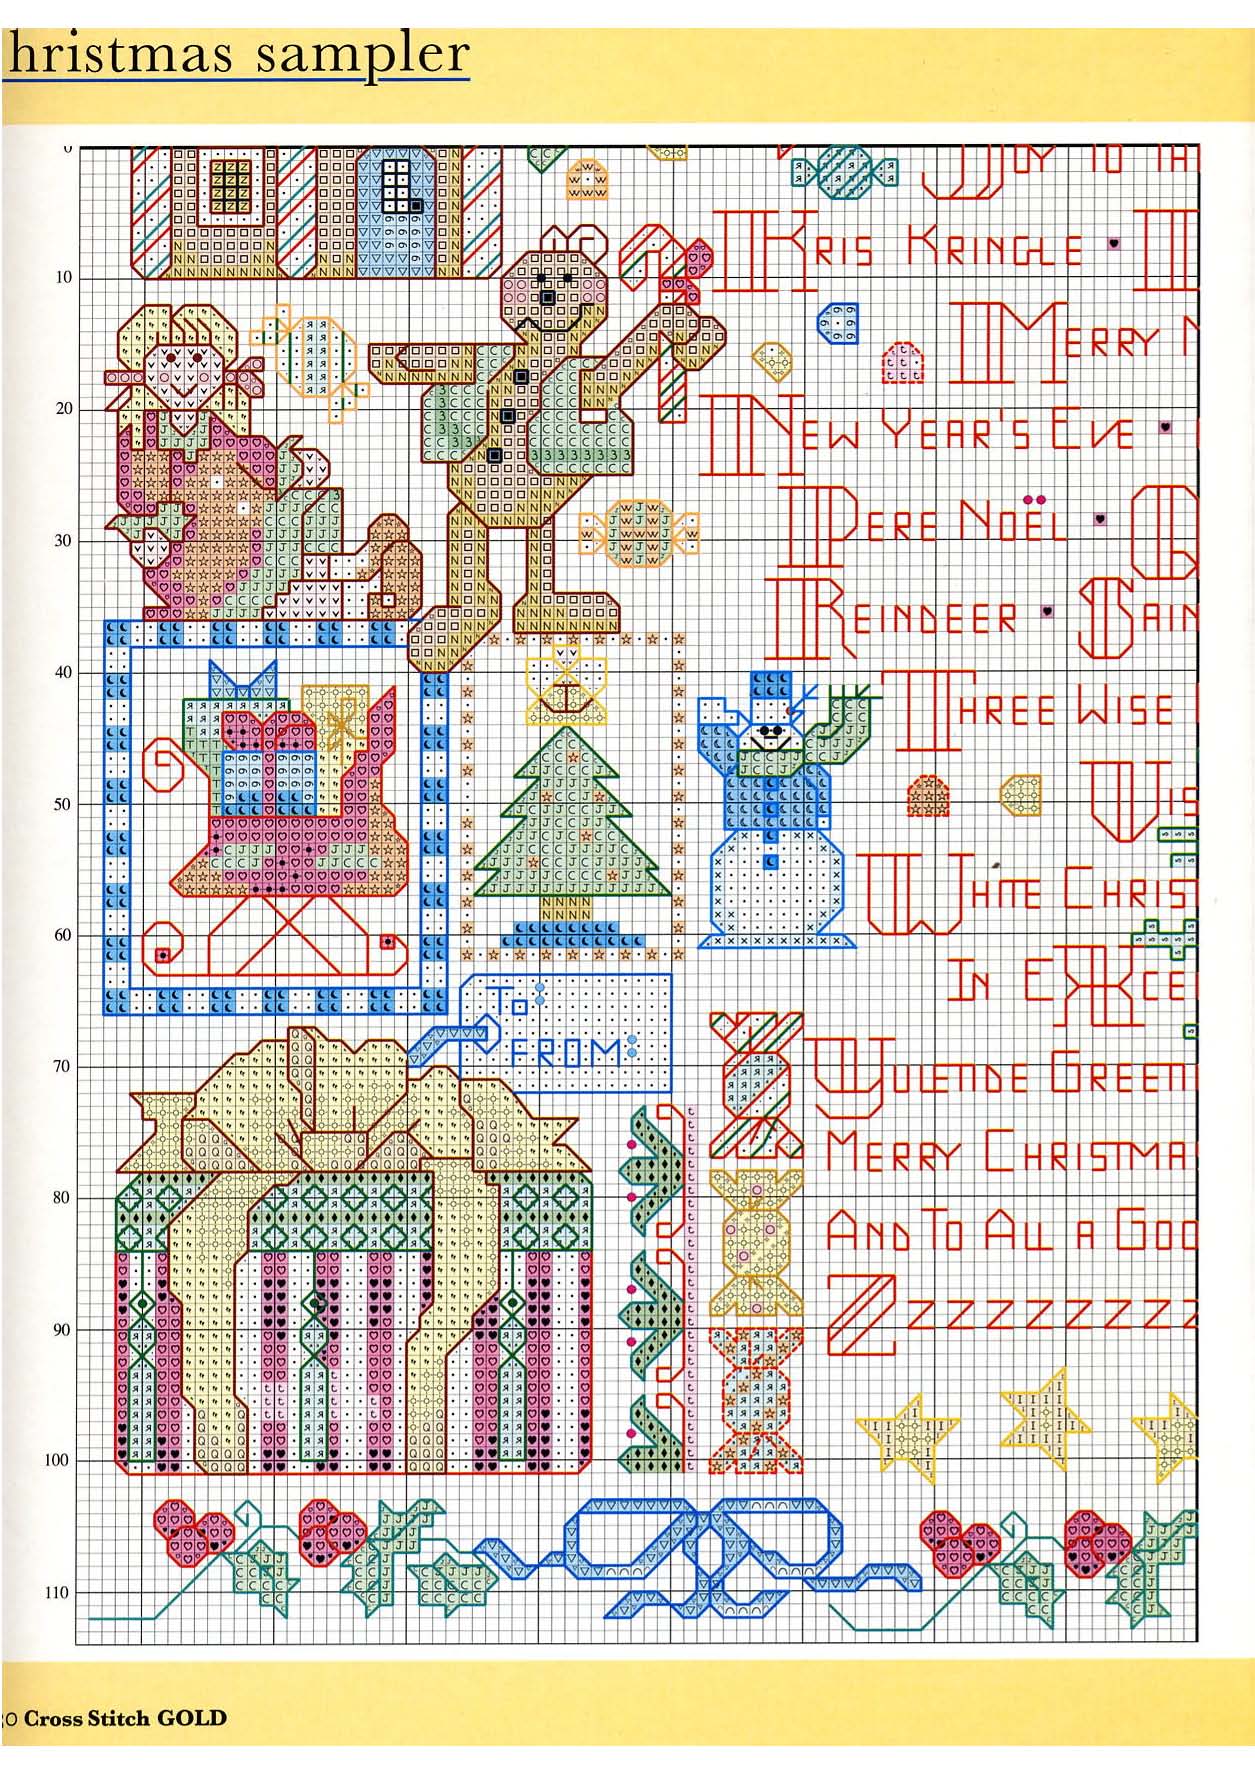 Christmas sampler with lots of details (4)